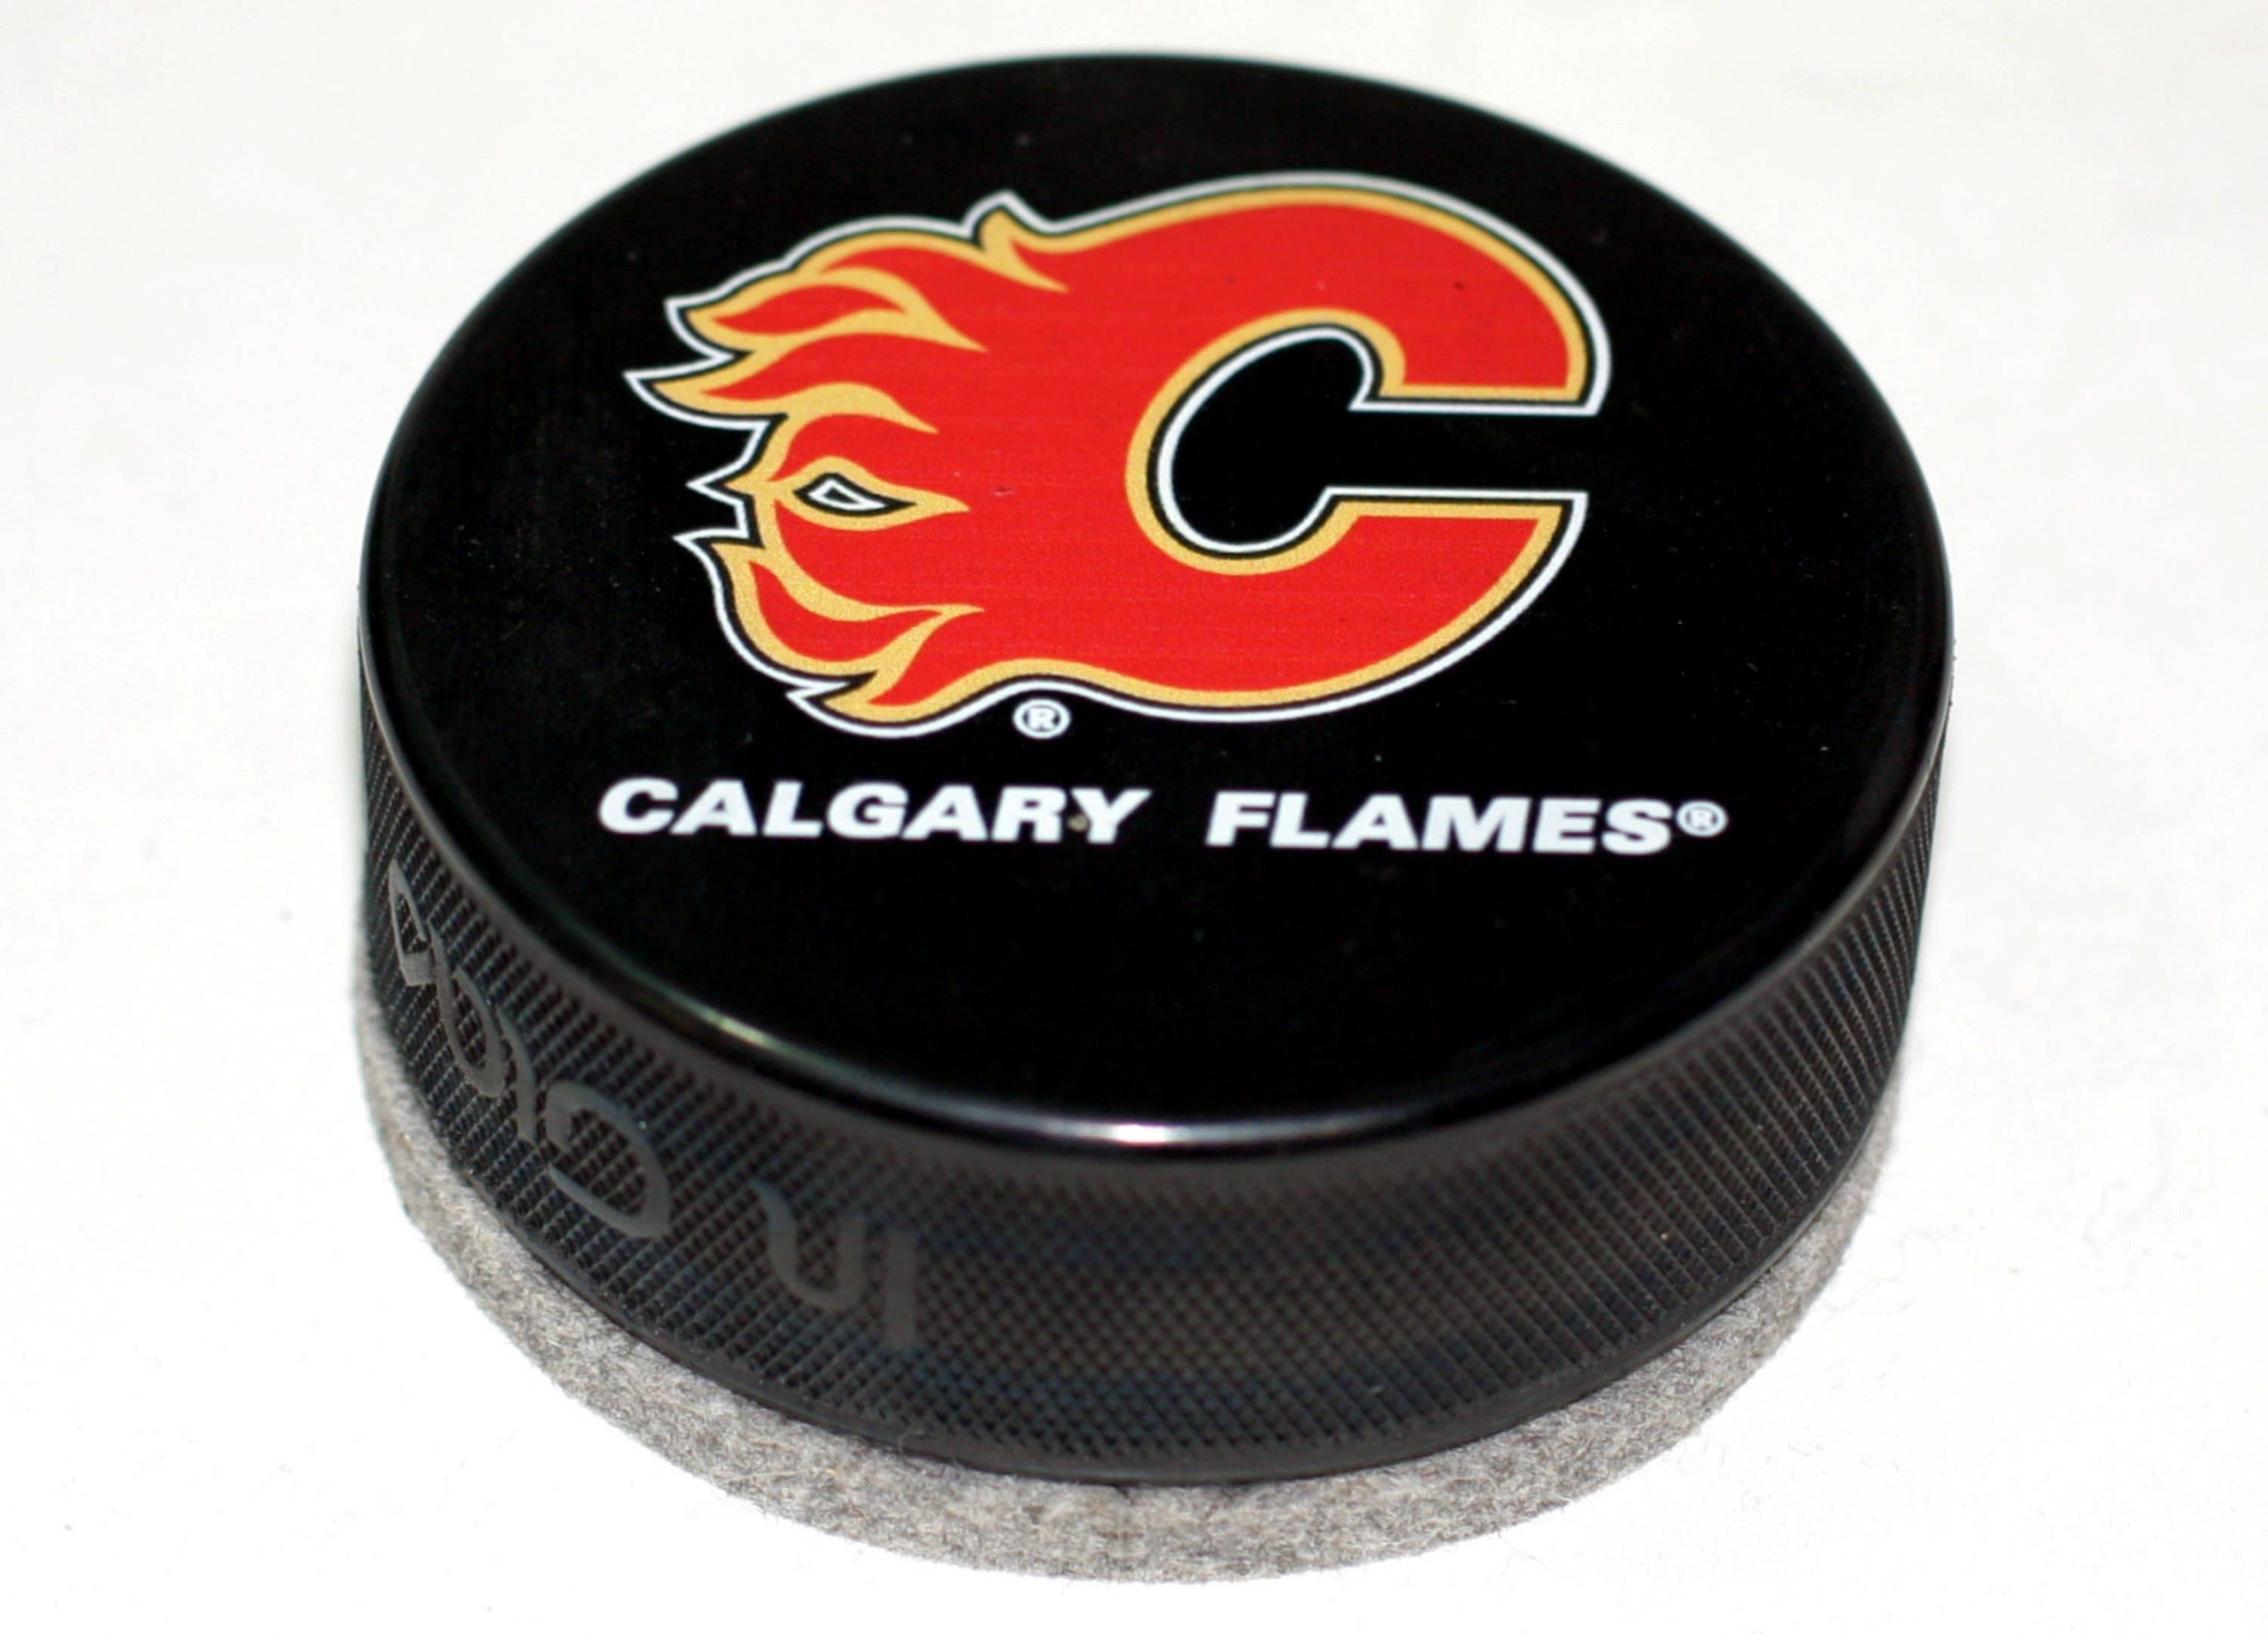 Box with White Flames Red Logo - Calgary Flames Basic Series Hockey Puck Board Eraser For Chalk